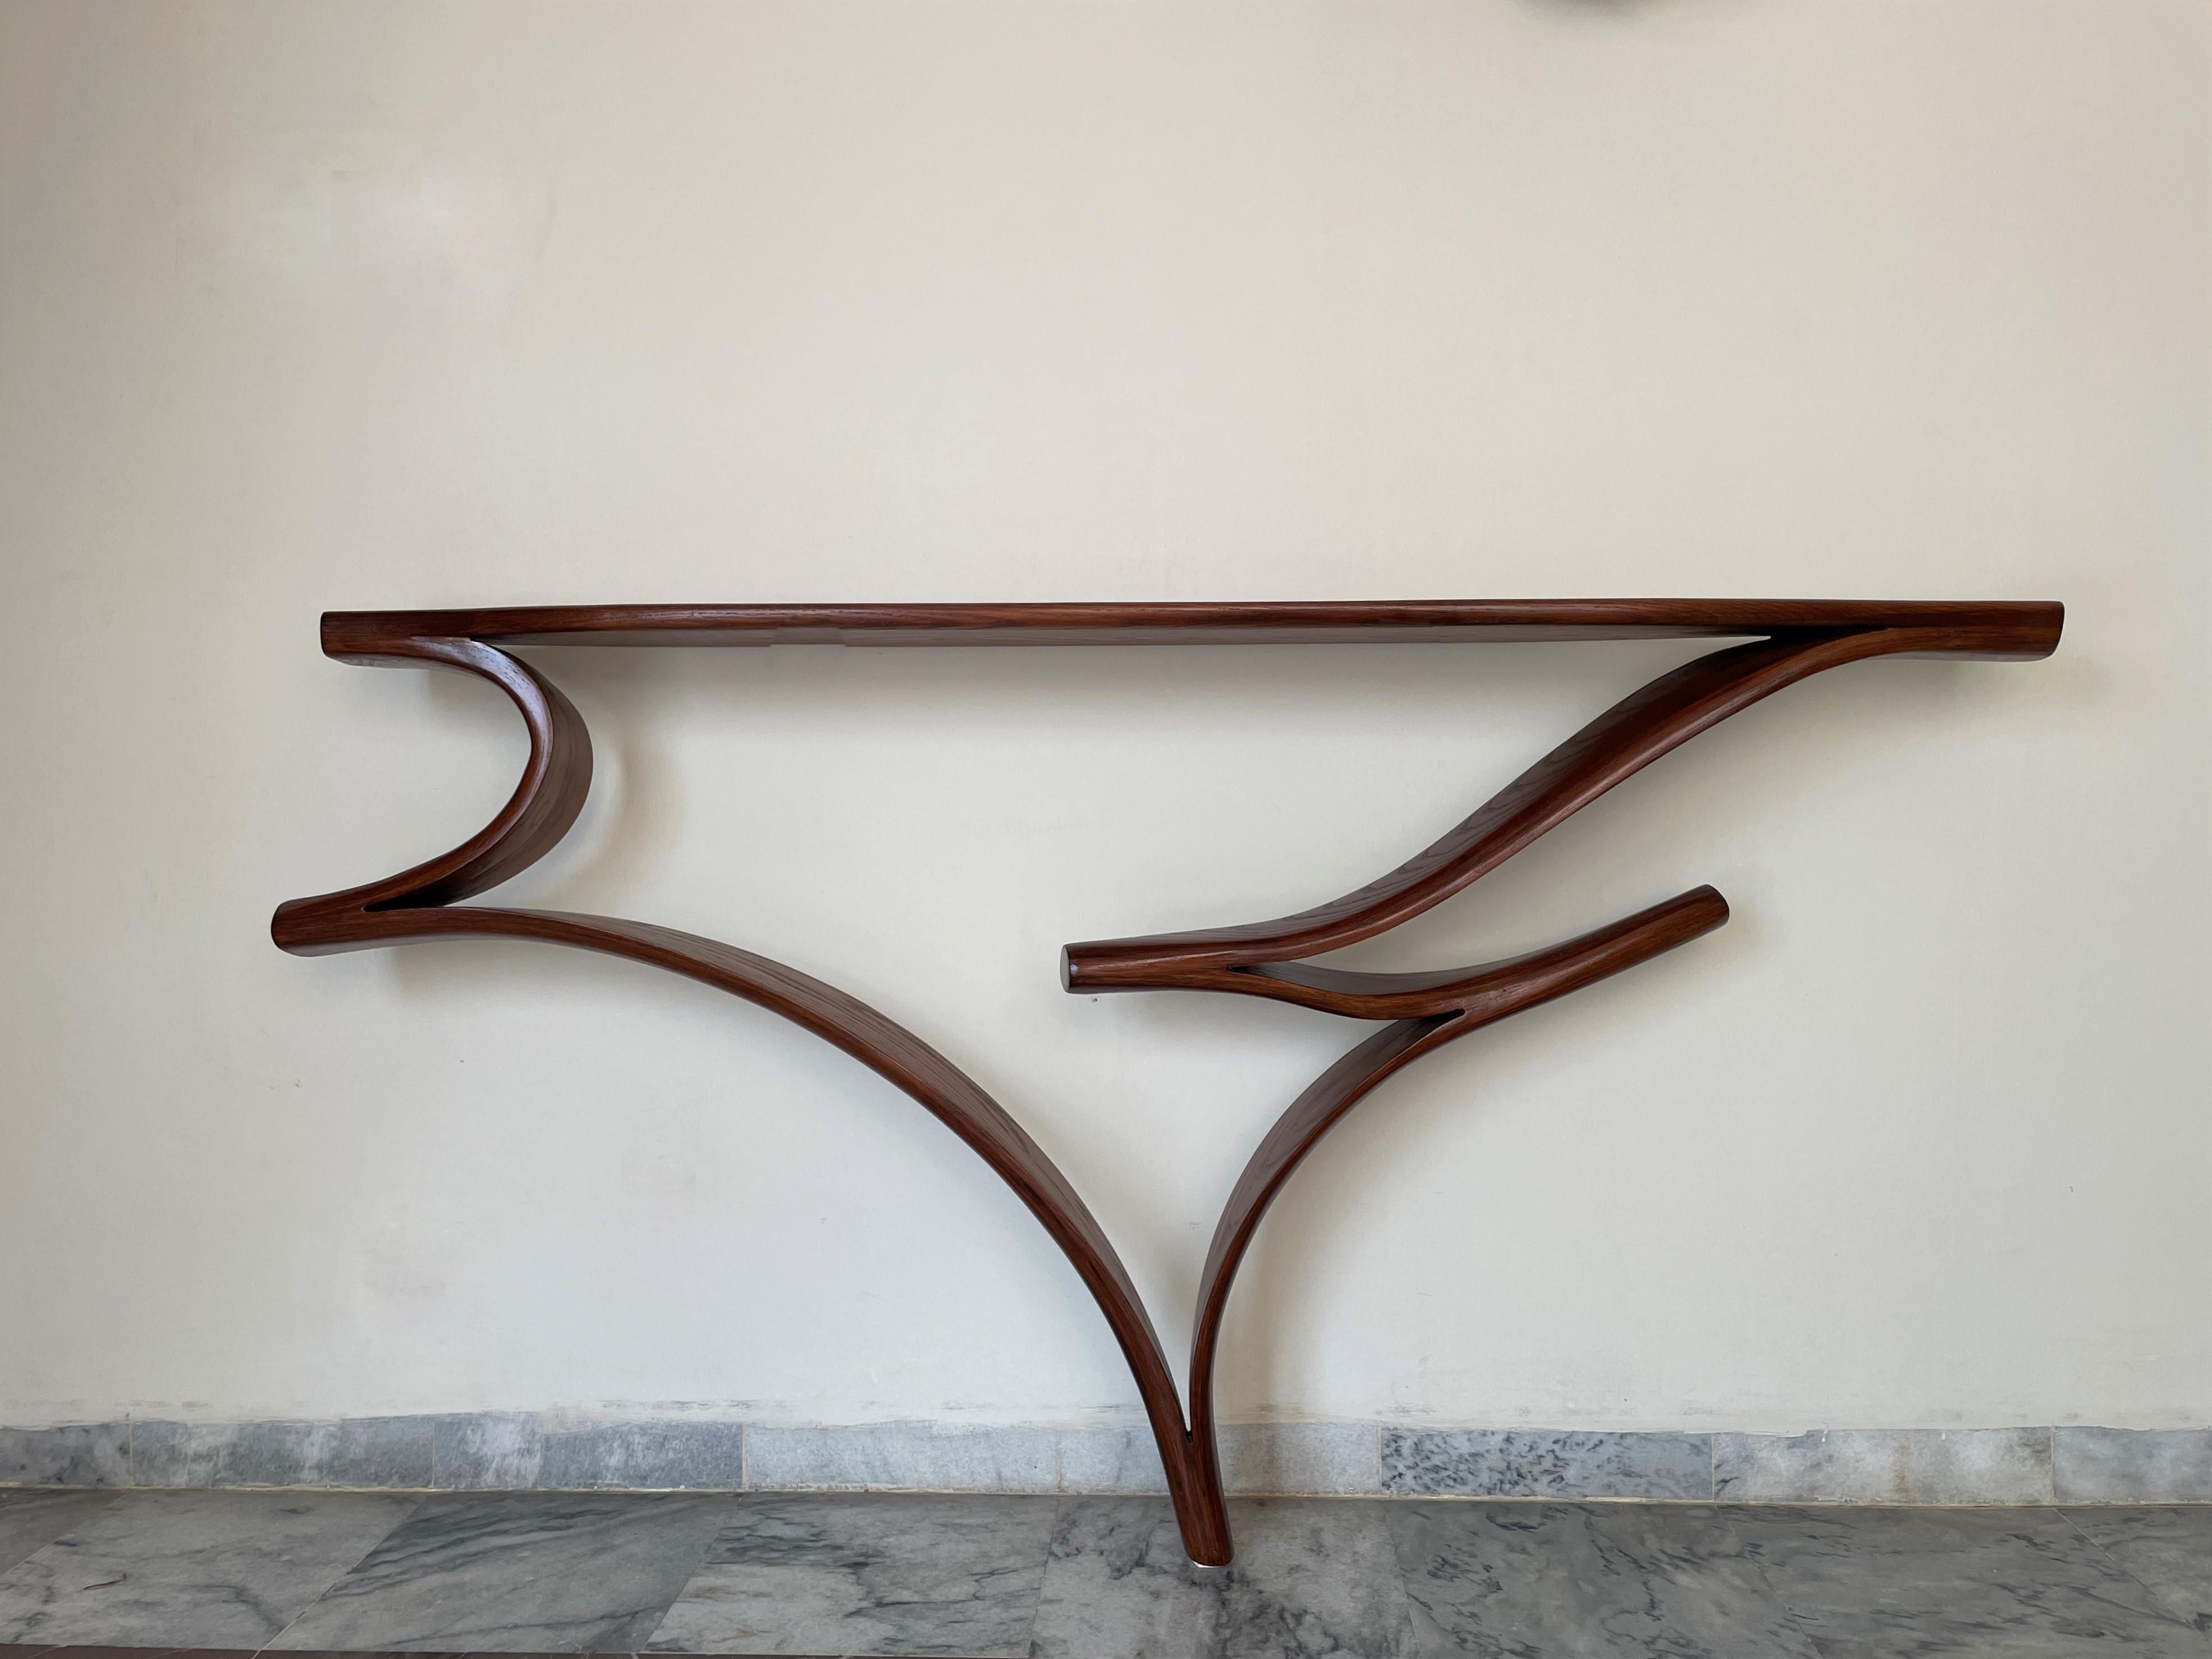 The console has a free-form design; the wood bends and curves with beautiful flows to create the design. The handcrafted details on the piece such as the curves, varying thickness of the wood and twists give the piece its organic flows. The piece